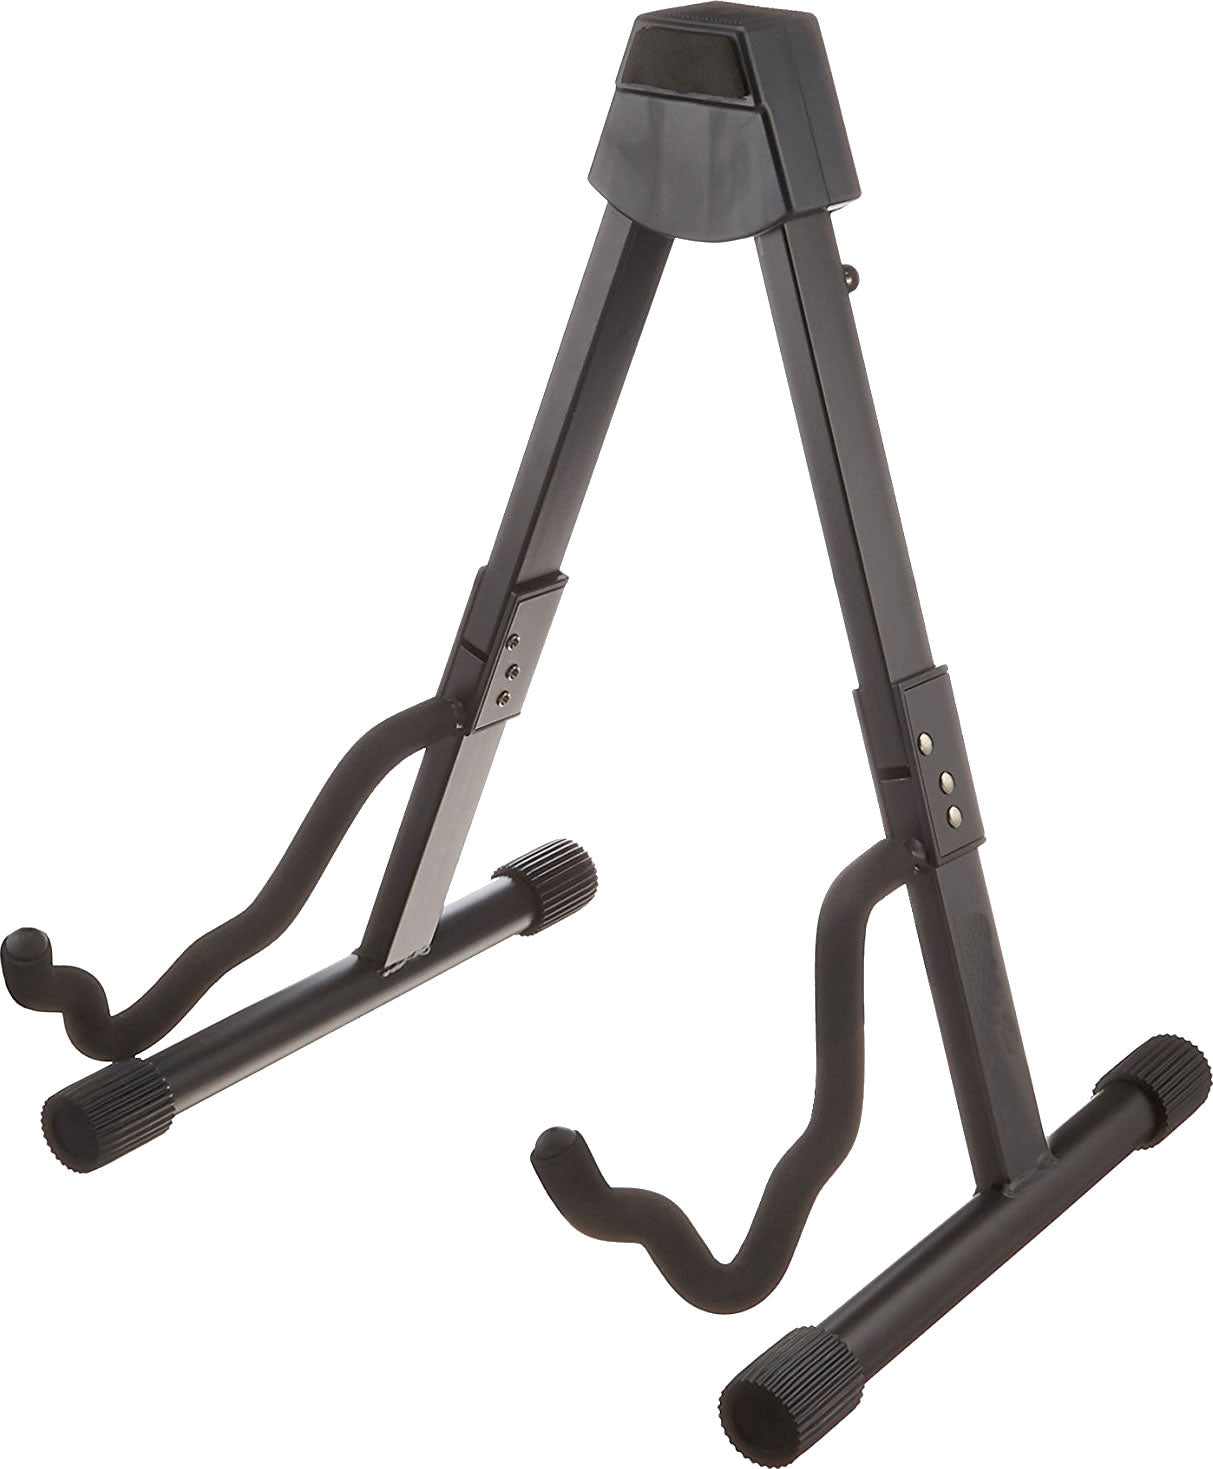 96-4010 Guitar Stand